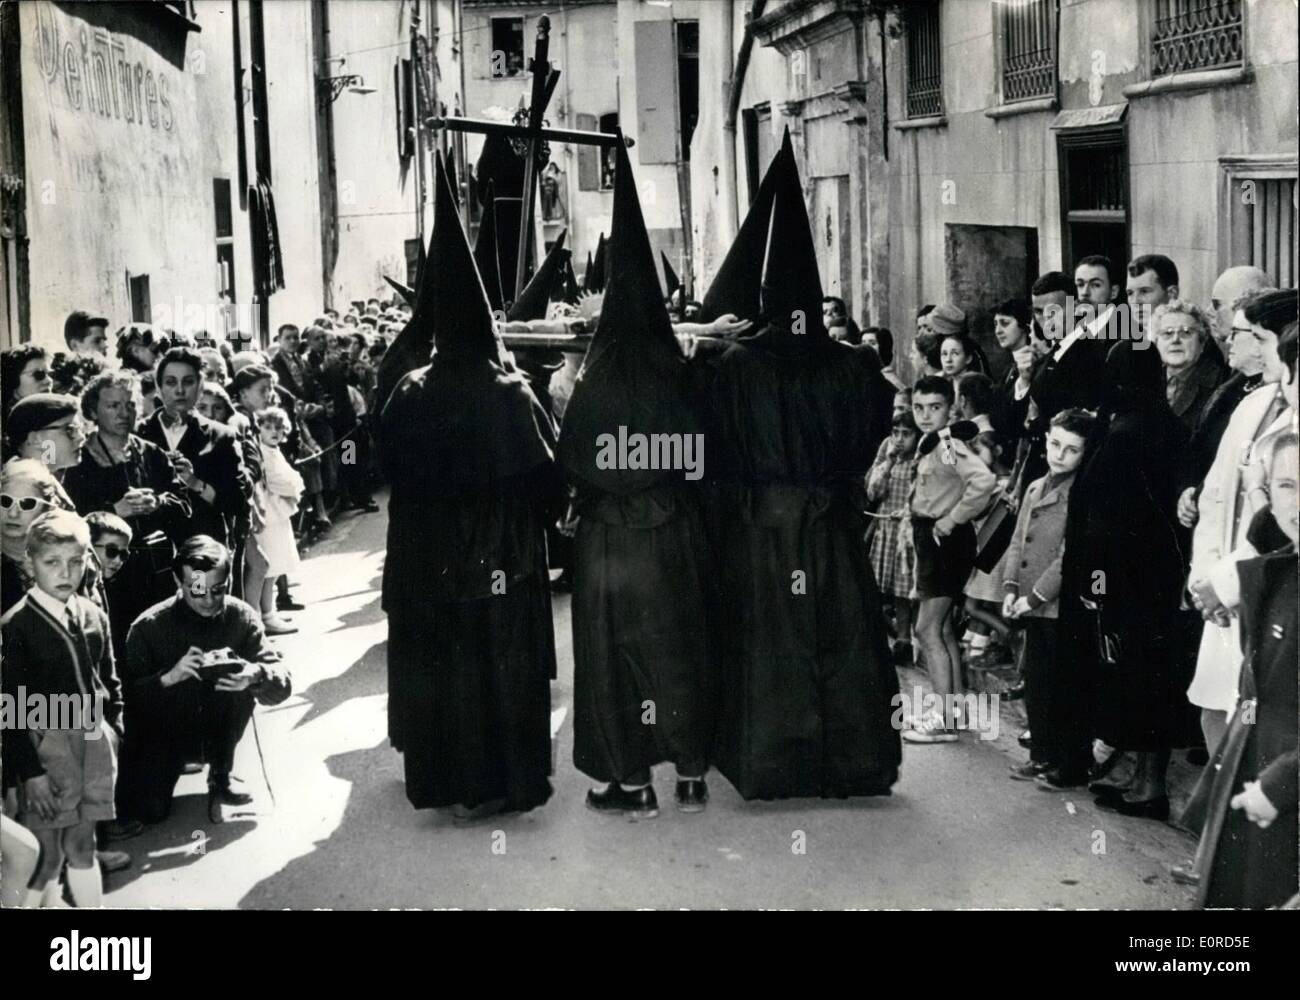 Mar. 03, 1959 - Holy Week In Southern France: Phot Shows Procession of ''The Black Penitents'' in Perpignan. Ke Stock Photo